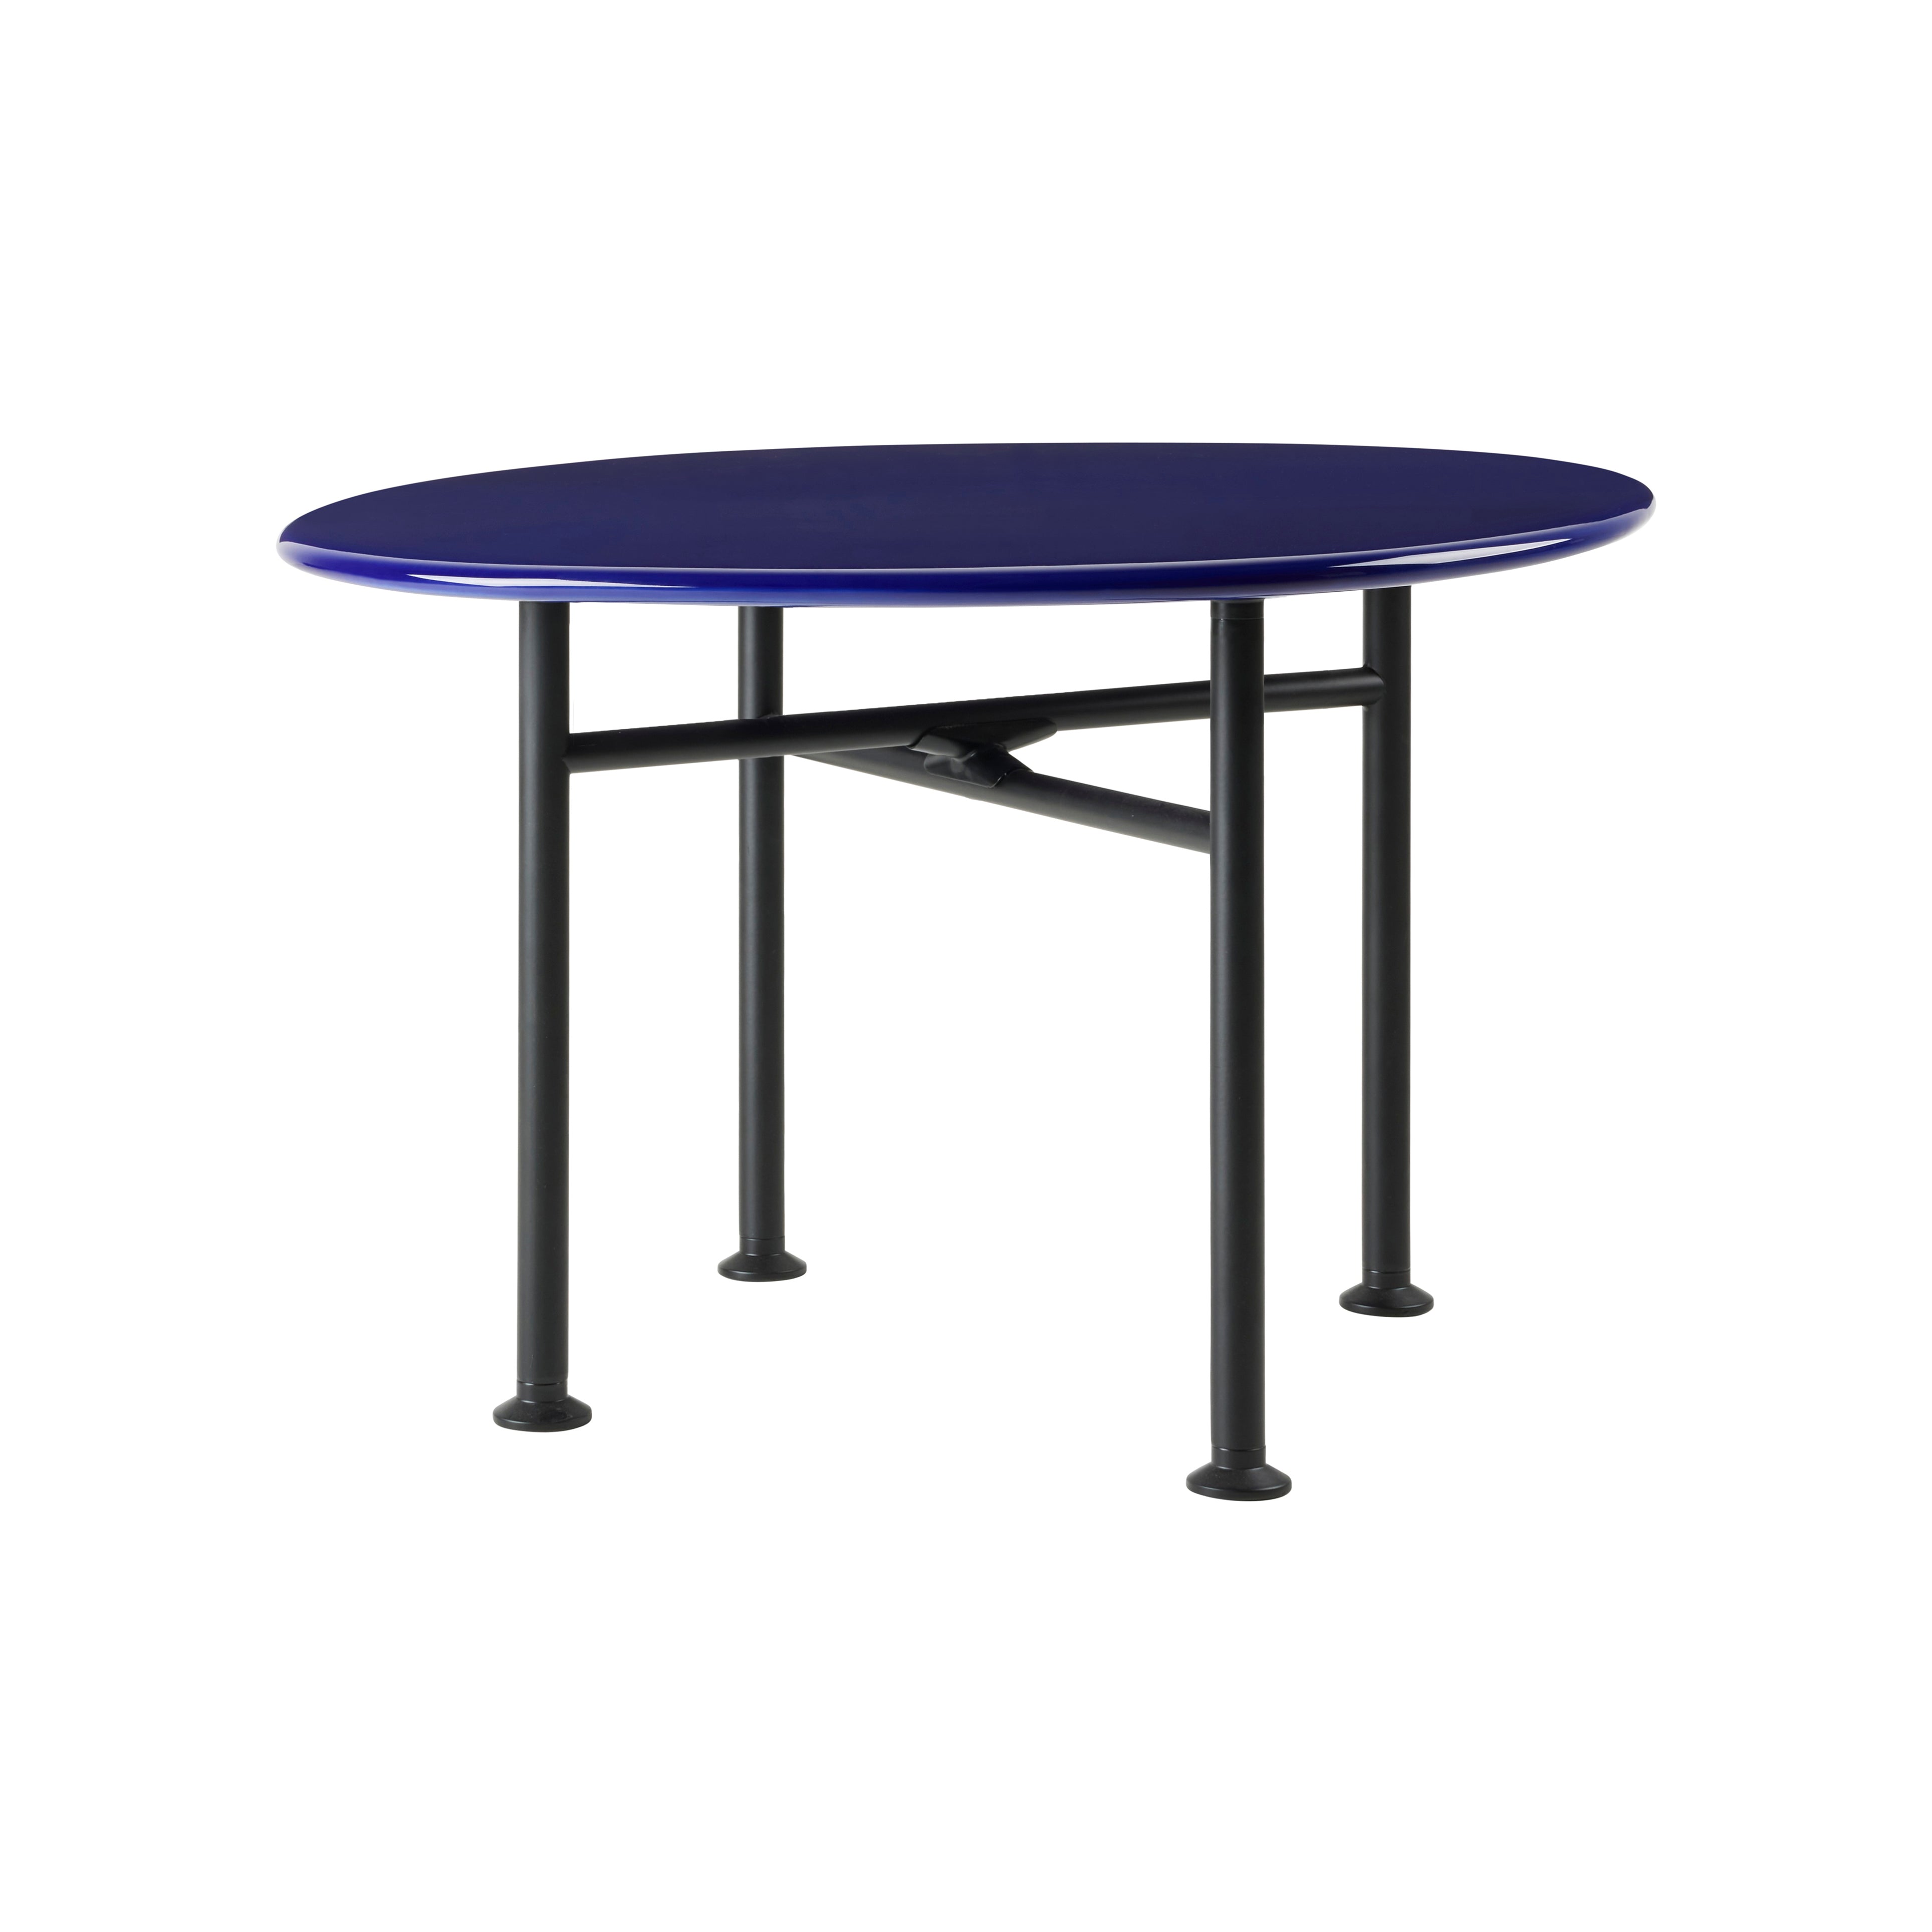 Carmel Outdoor Coffee Table: Square + Small - 23.6